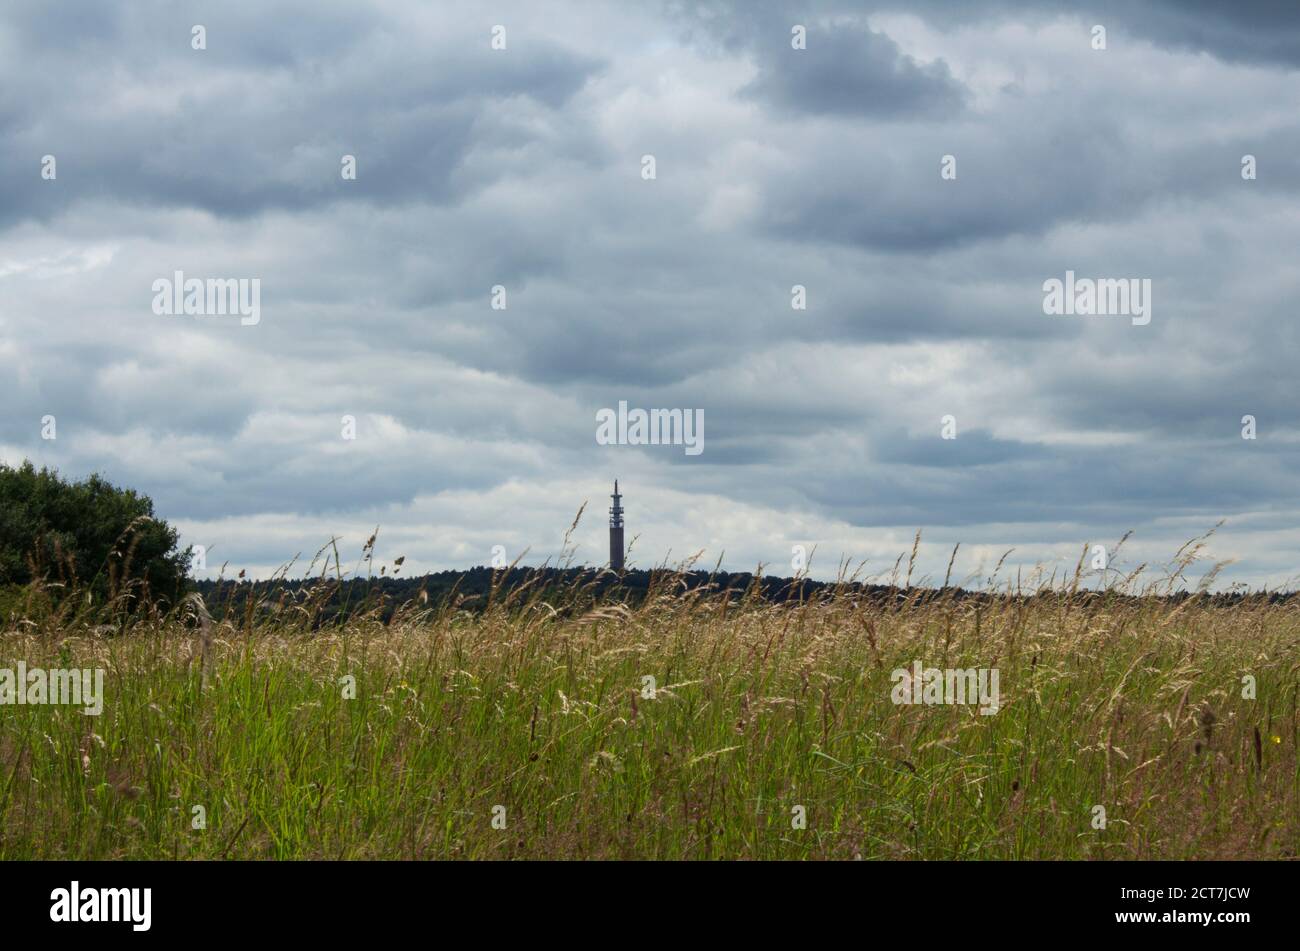 A view of Pye Green Tower, Cannock Chase taken from a distance with feathery grasses in the foreground. Stock Photo